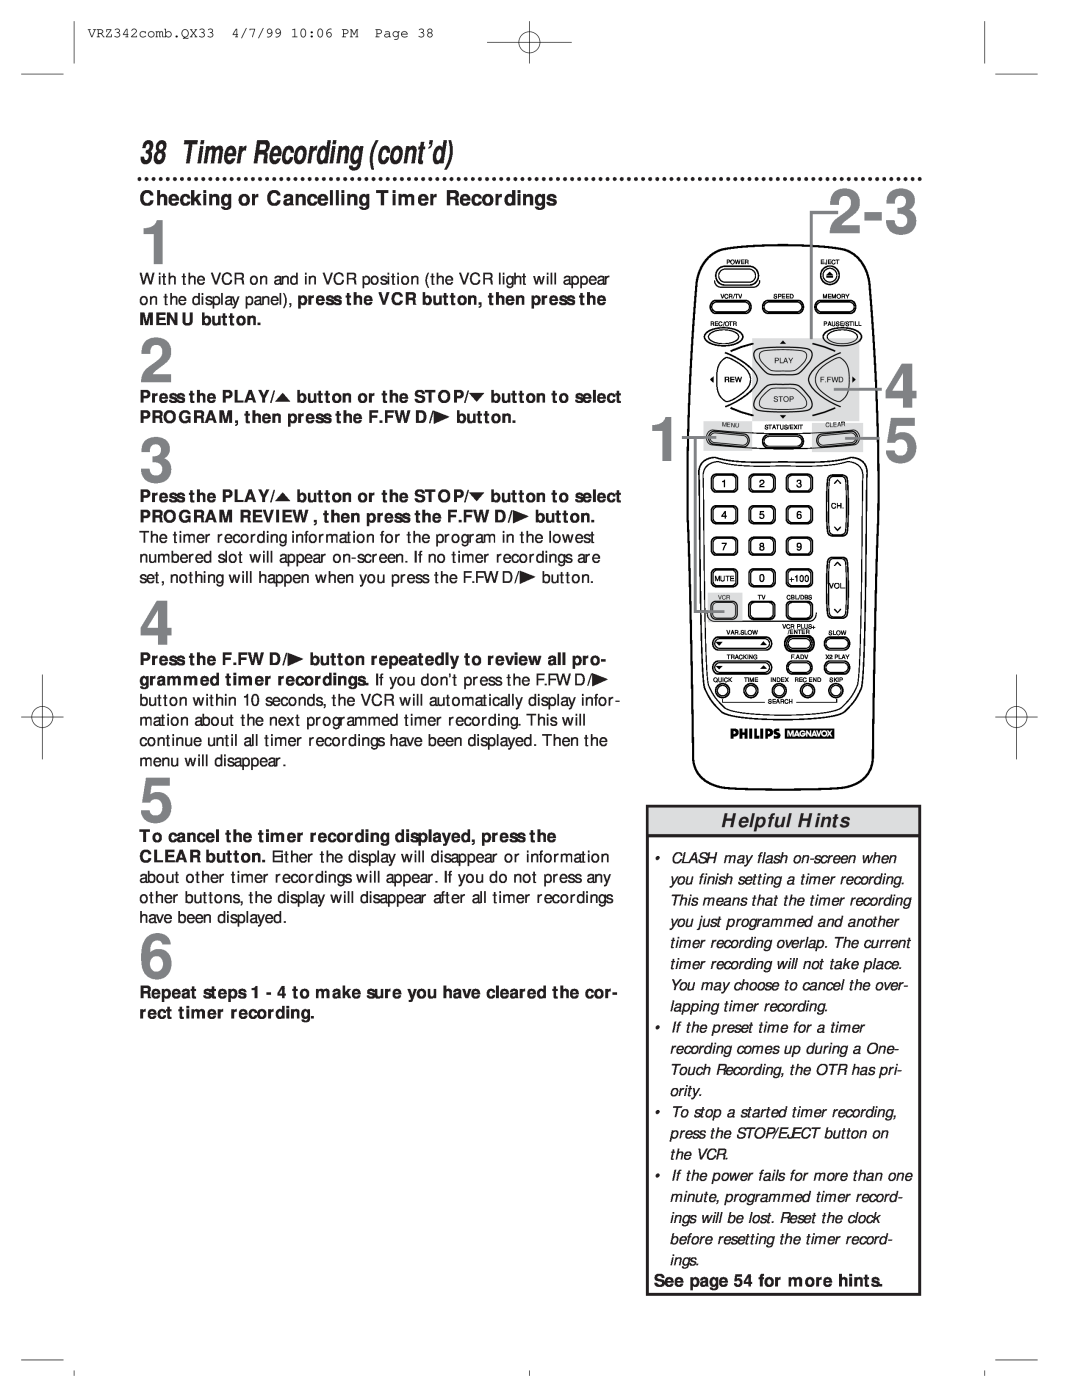 Magnavox VRZ342AT99 owner manual Timer Recording cont’d, Checking or Cancelling Timer Recordings, Helpful Hints 